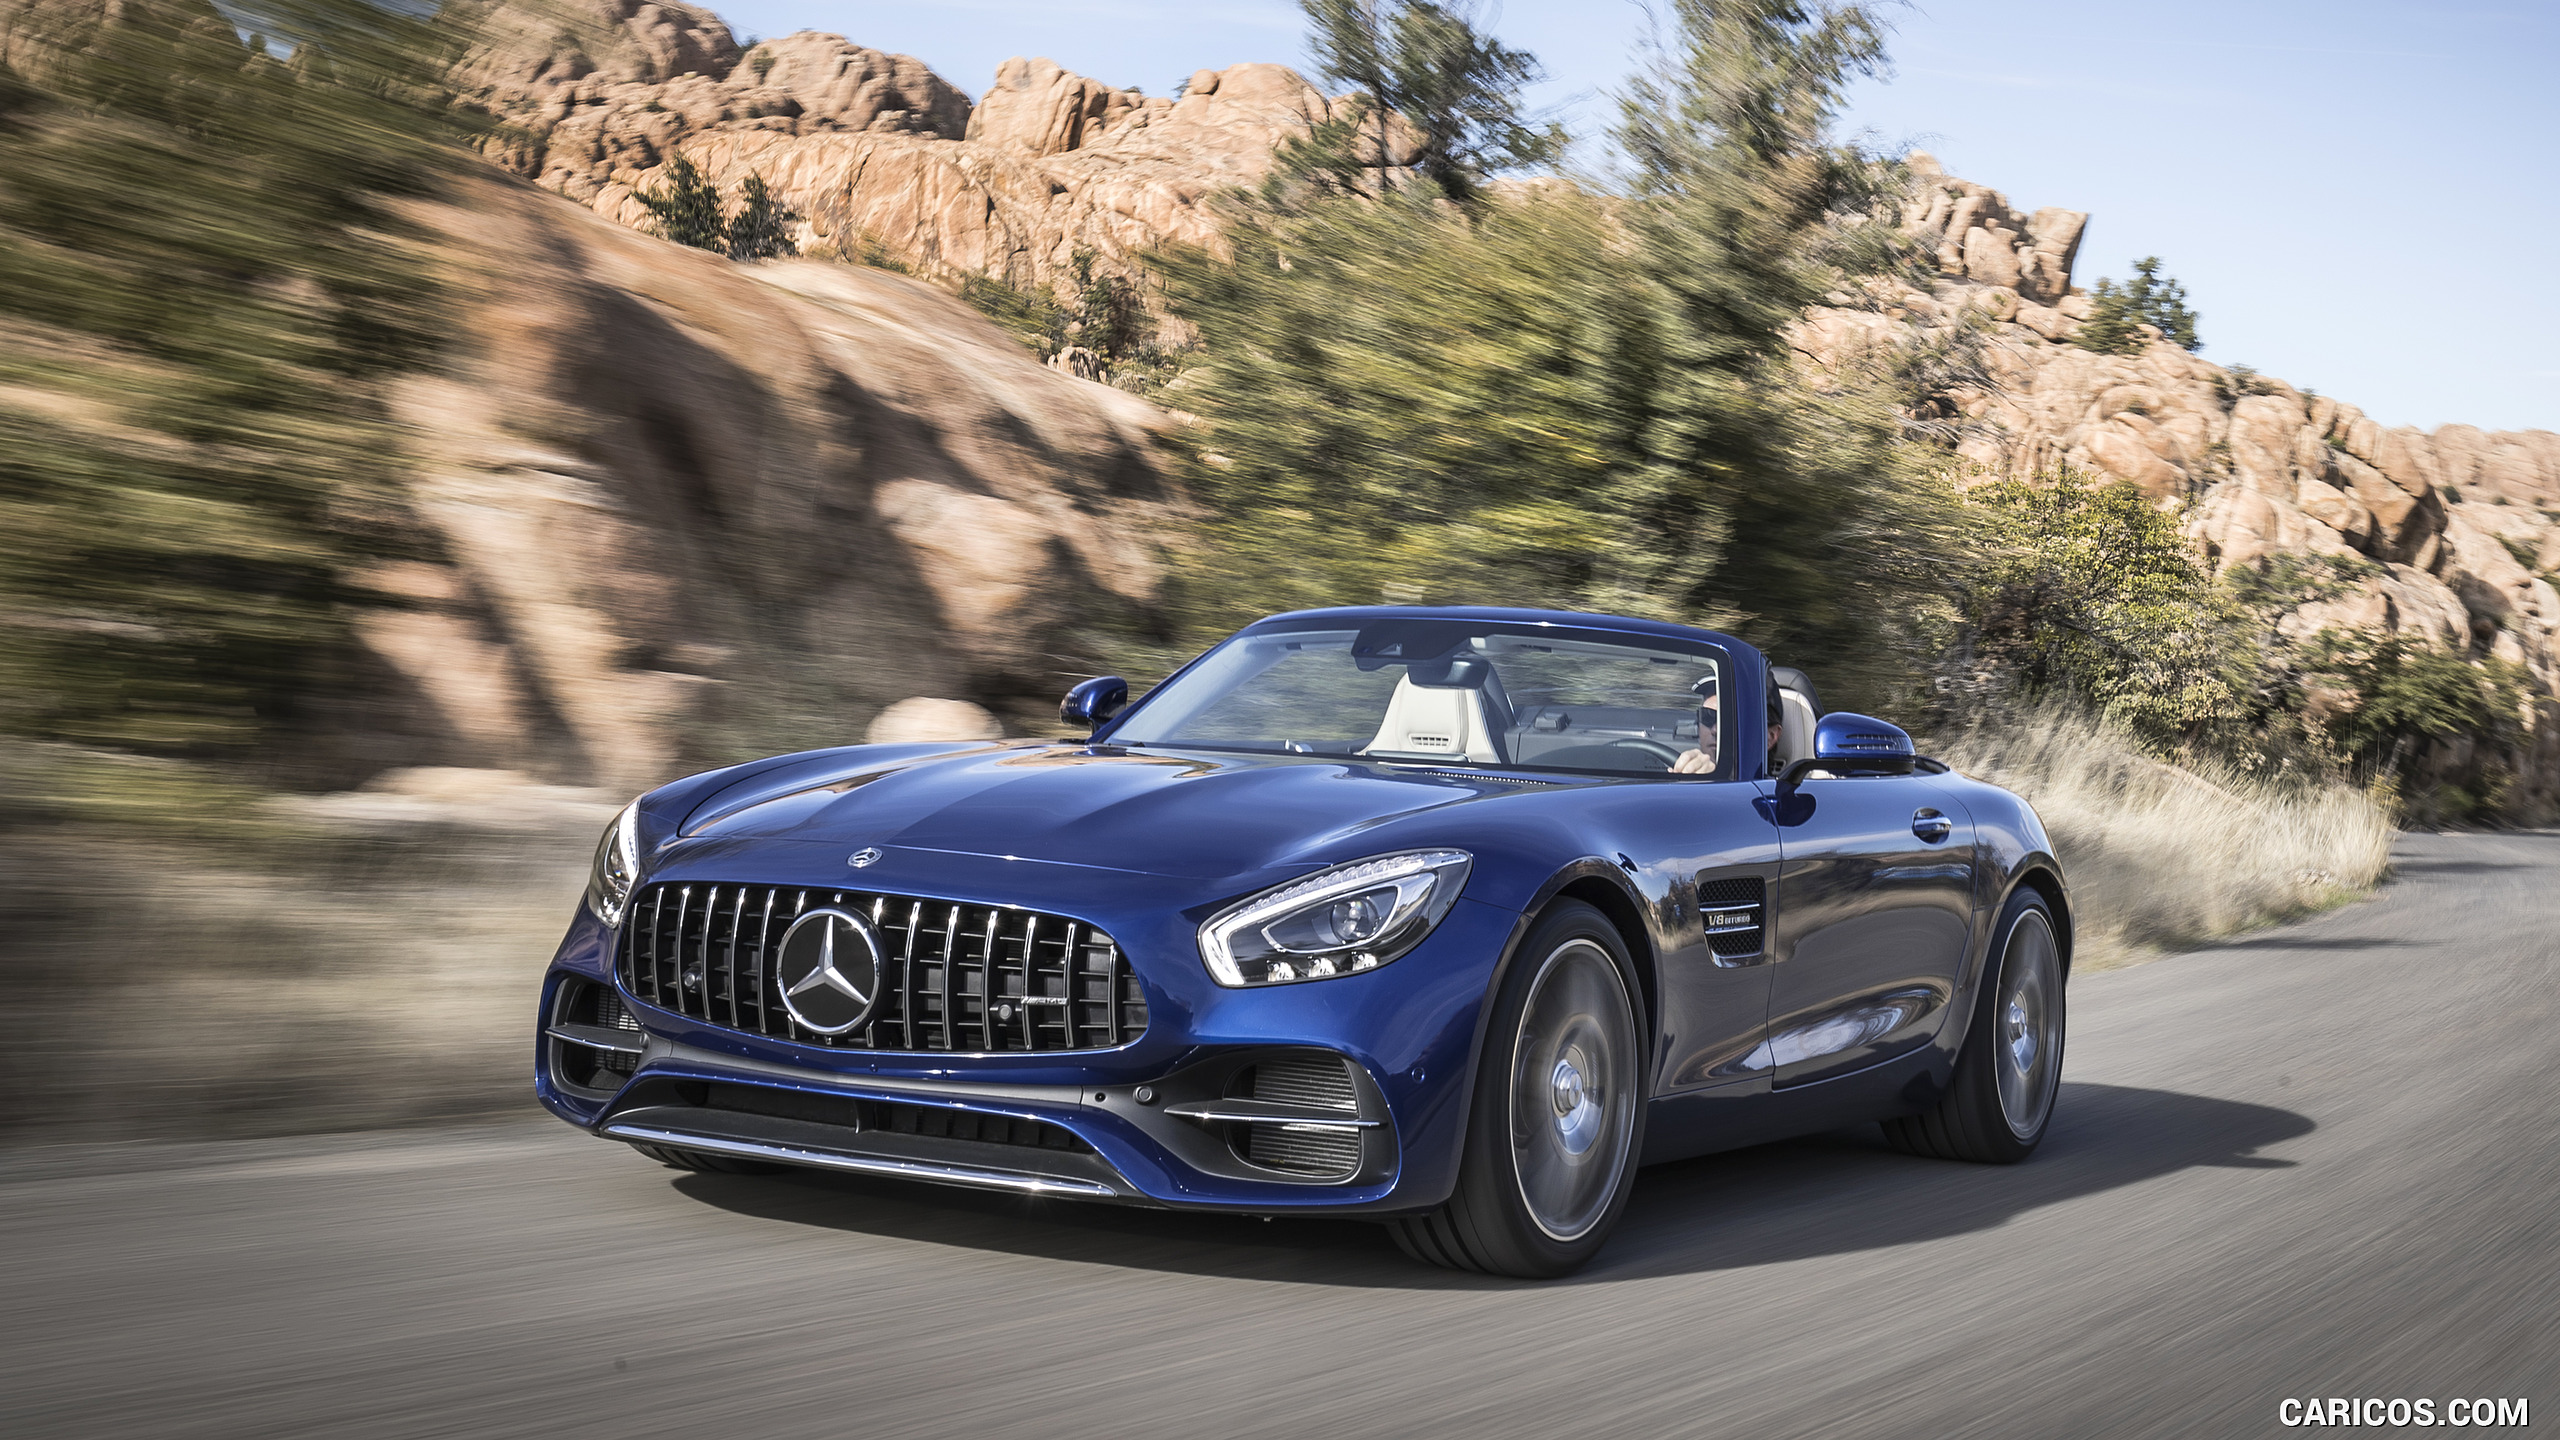 2018 Mercedes-AMG GT Roadster - Front Three-Quarter, #131 of 350